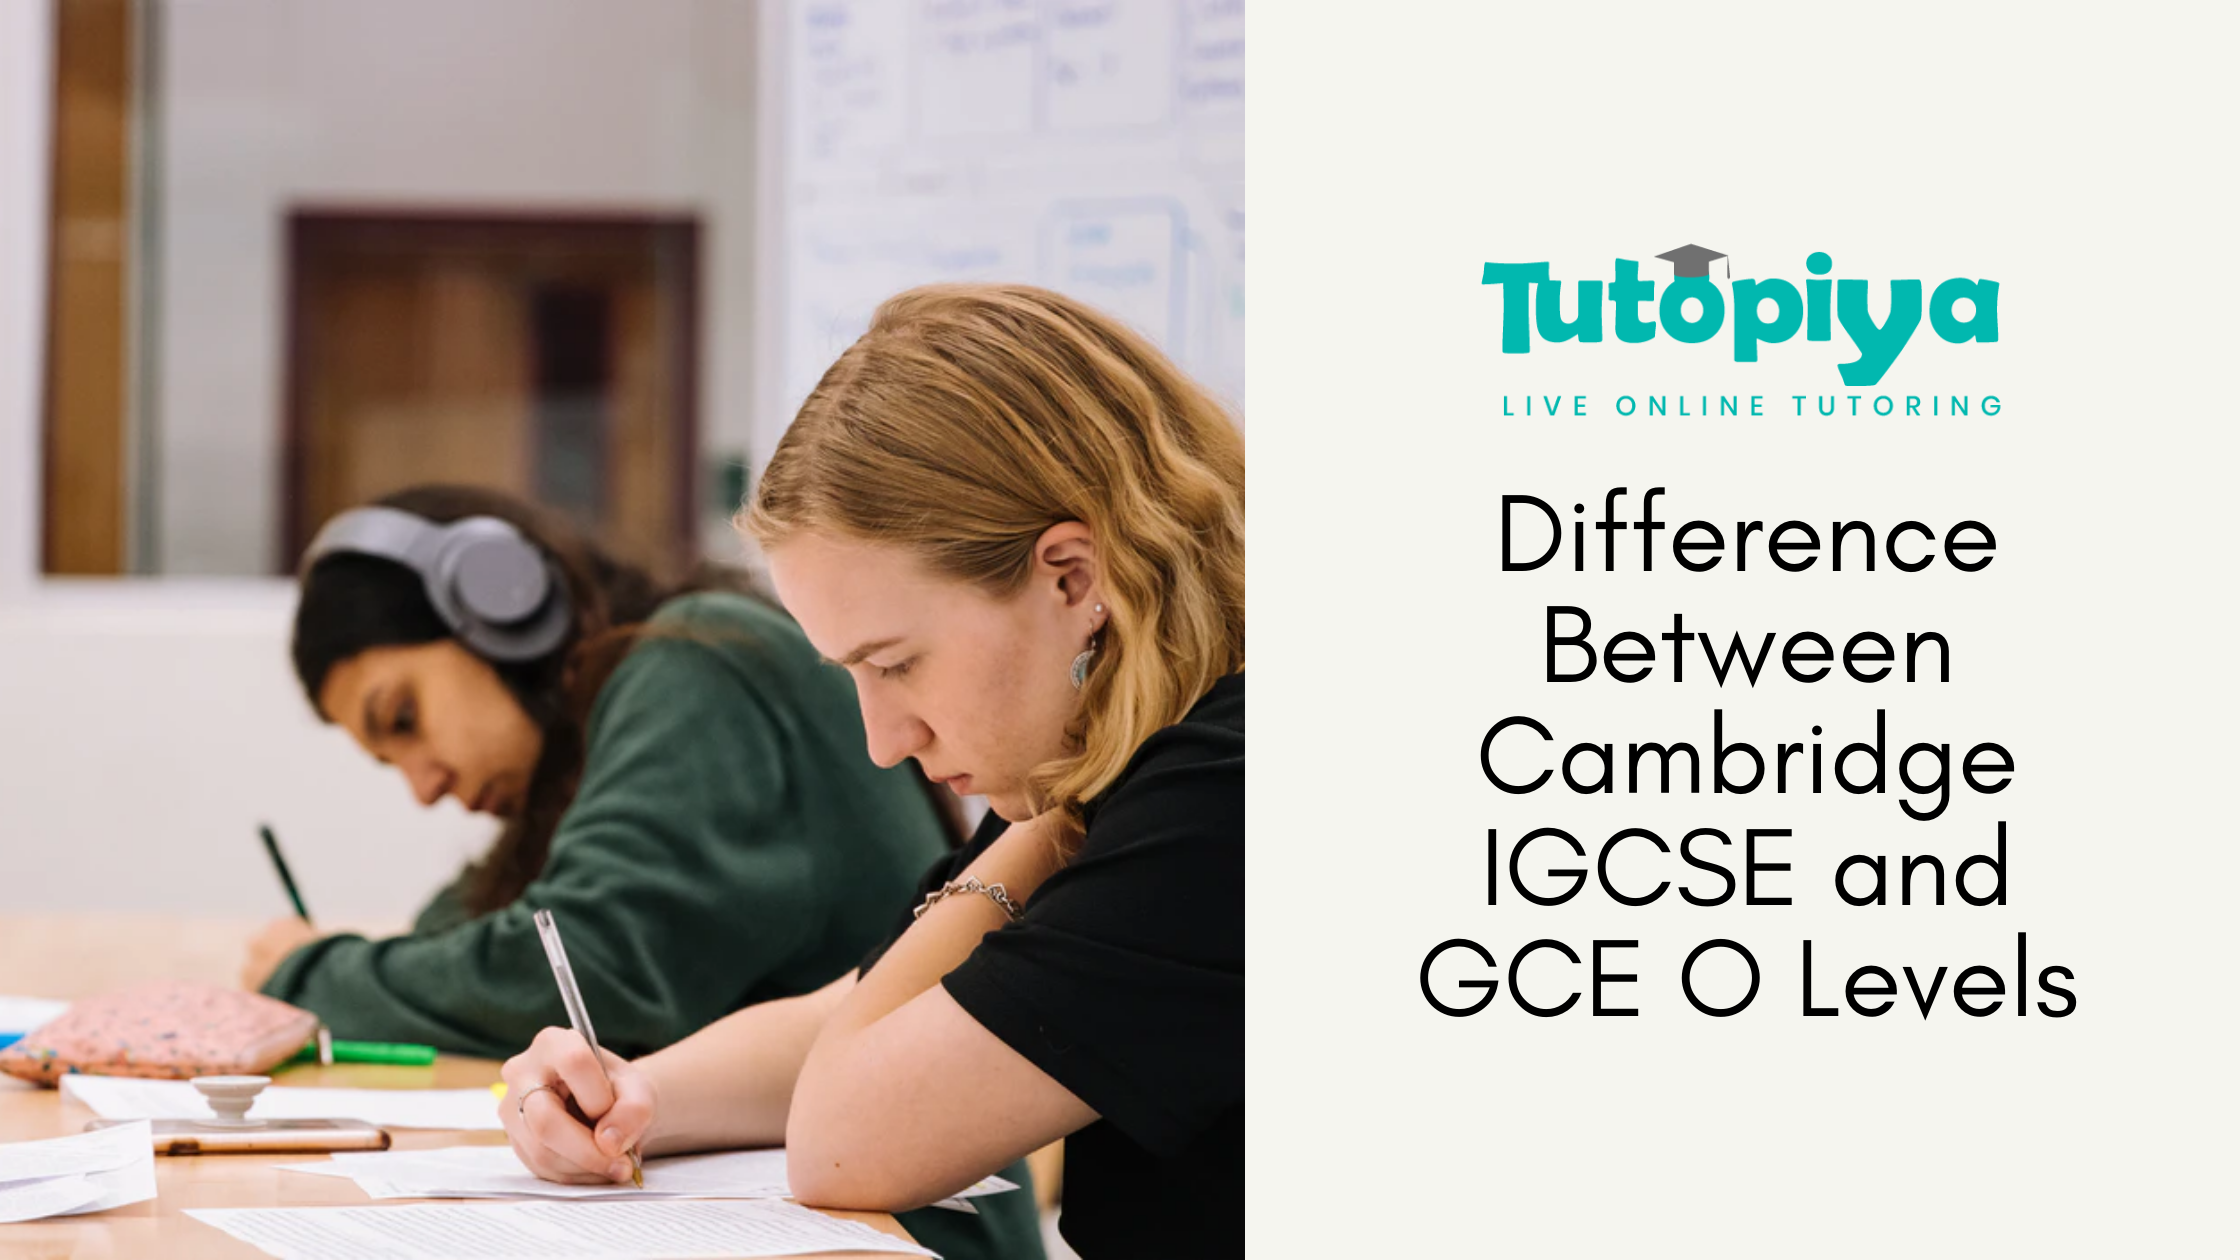 Igcse Vs Gce O Levels The Difference Between Cambridge